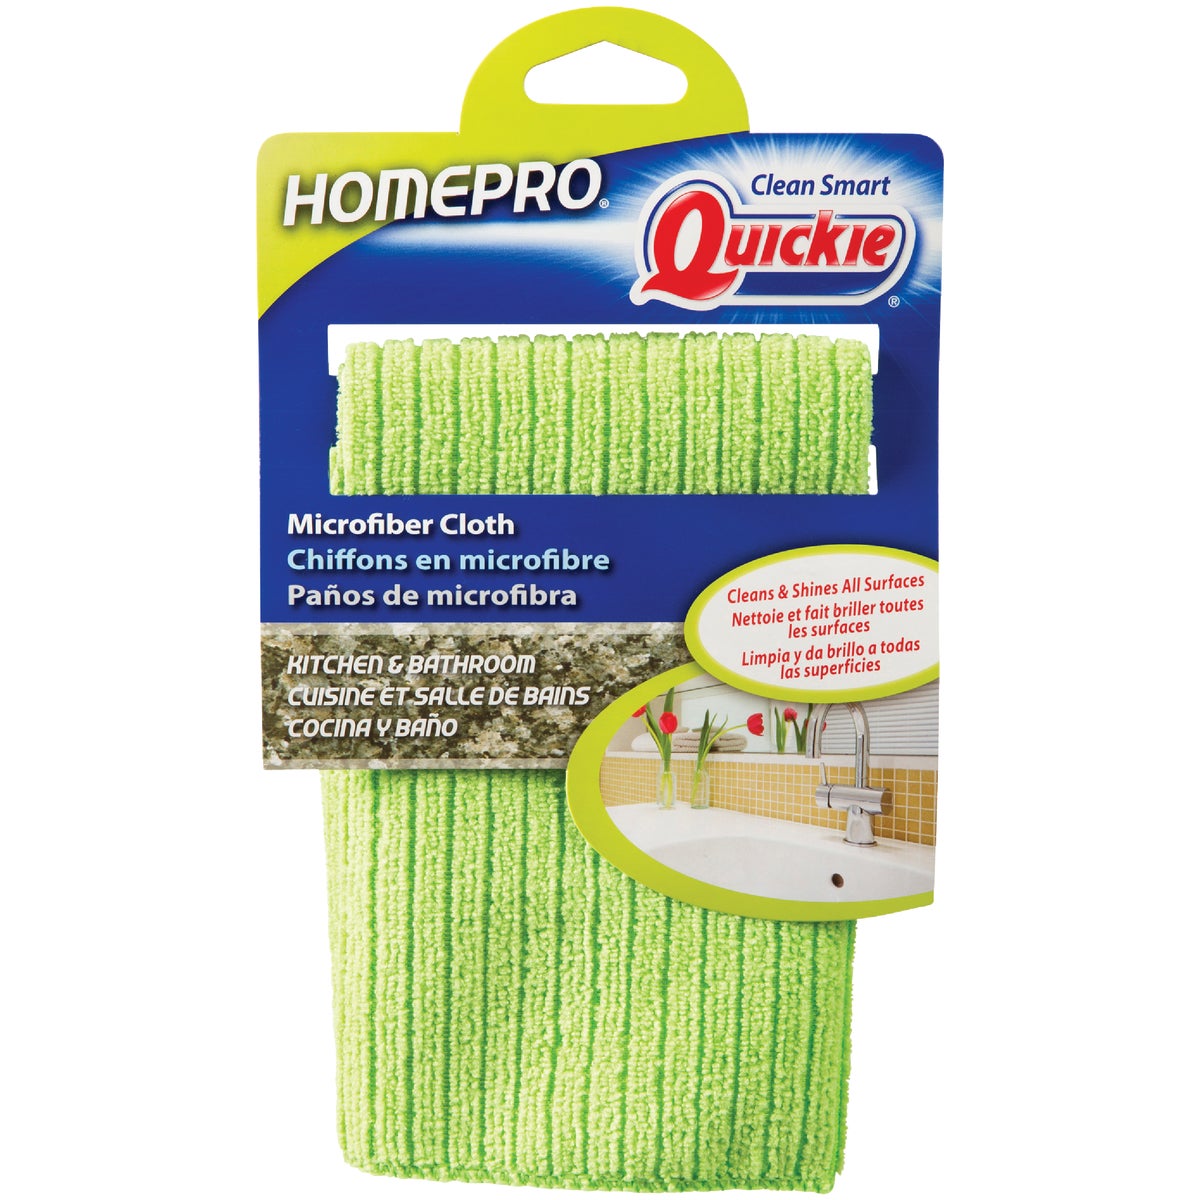 Quickie HomePro 13 In. x 15 In. Kitchen & Bath Microfiber Cleaning Cloth